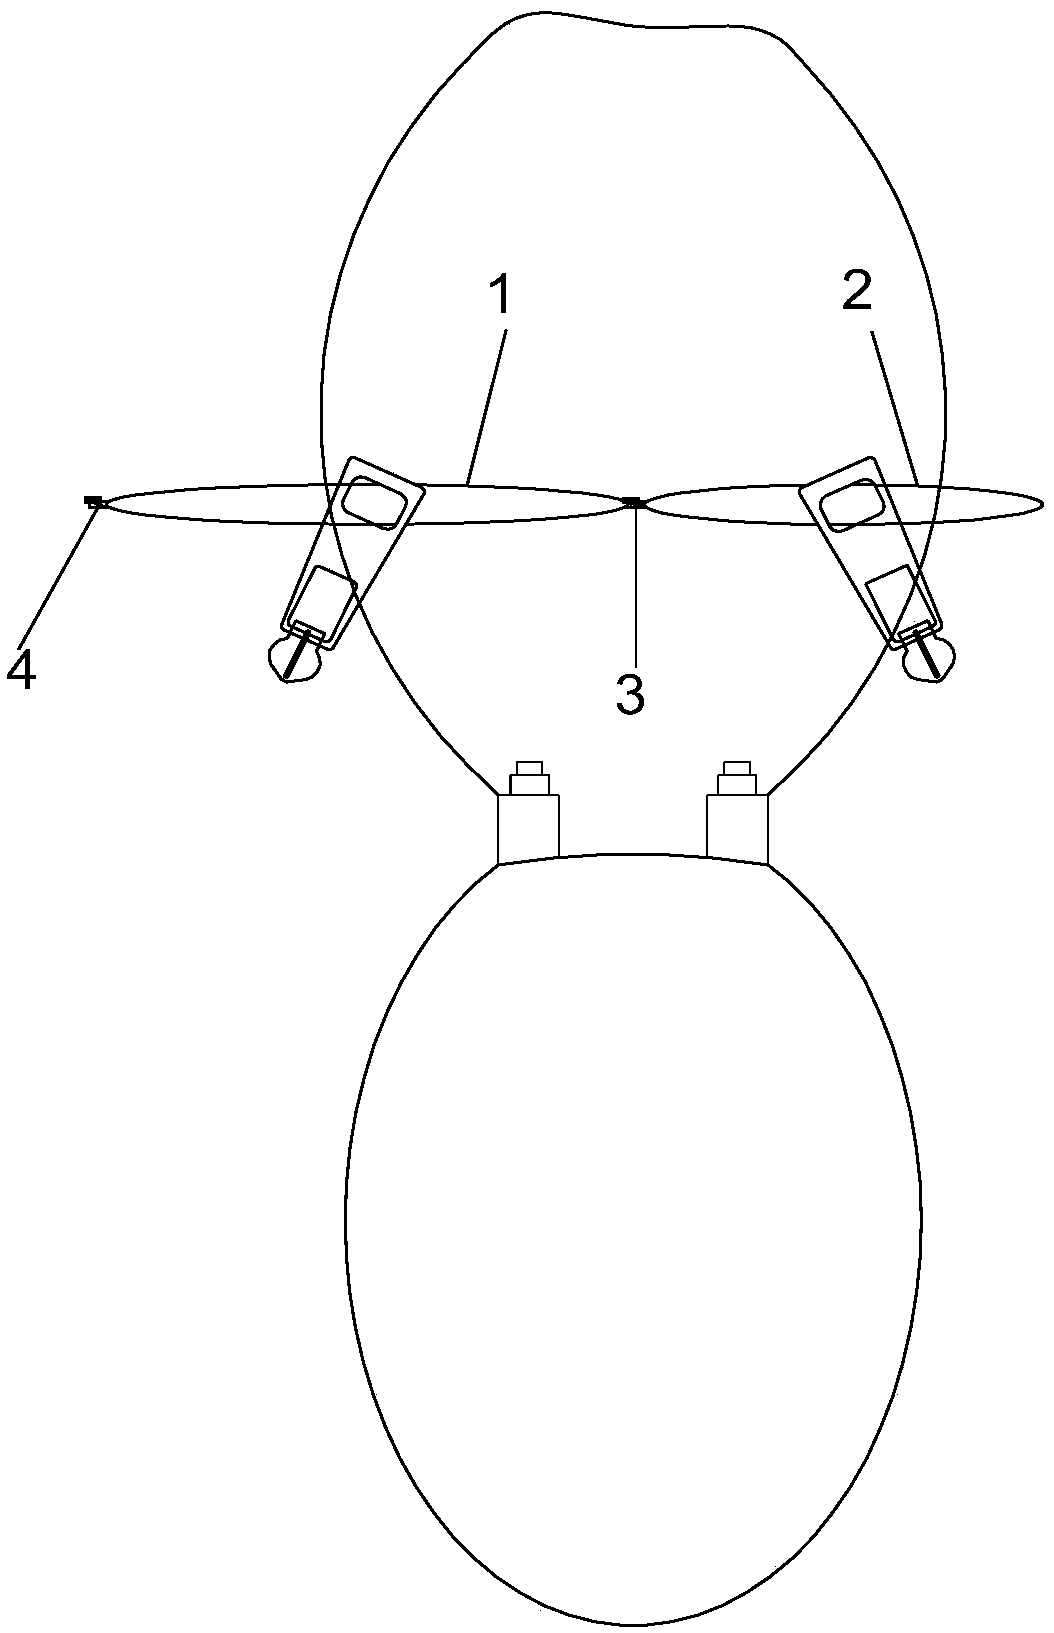 Anti-theft device for zipper of bag or suitcase